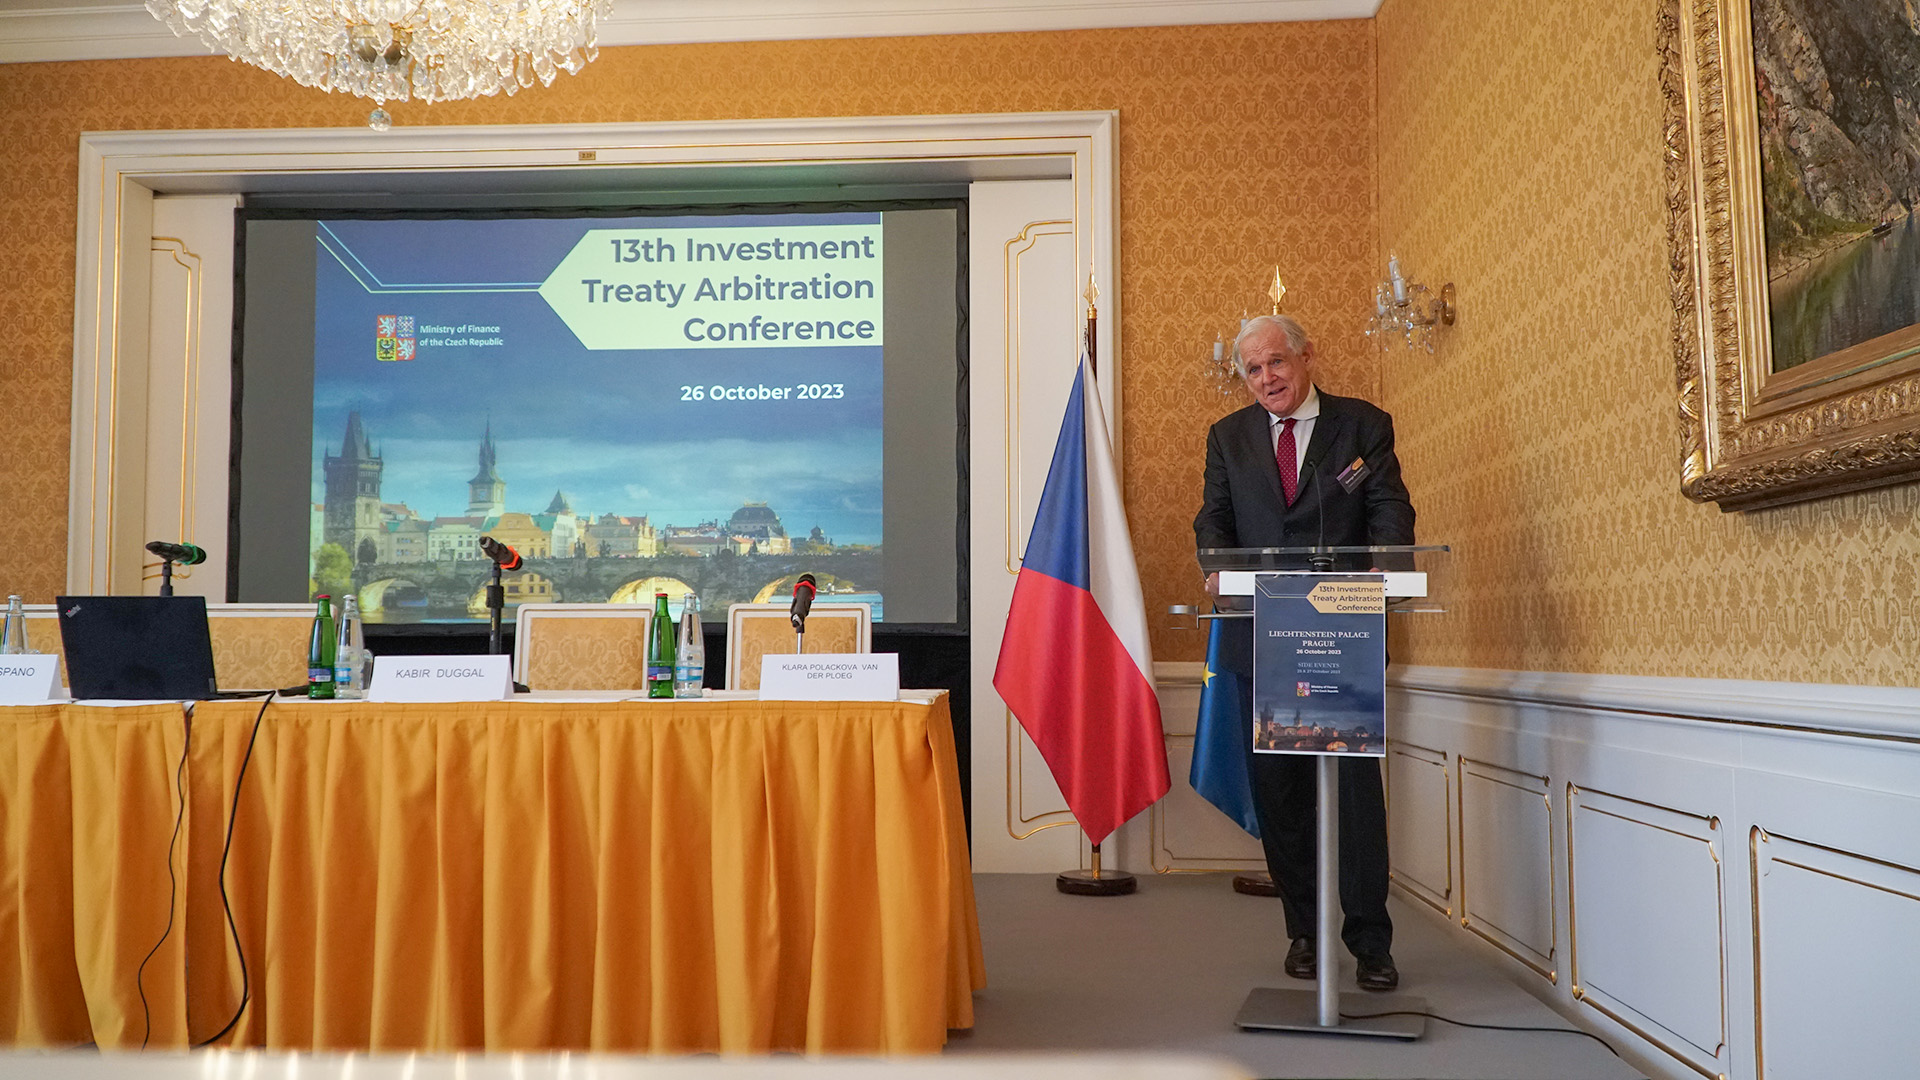 The 13th meeting of international investment law experts in Prague